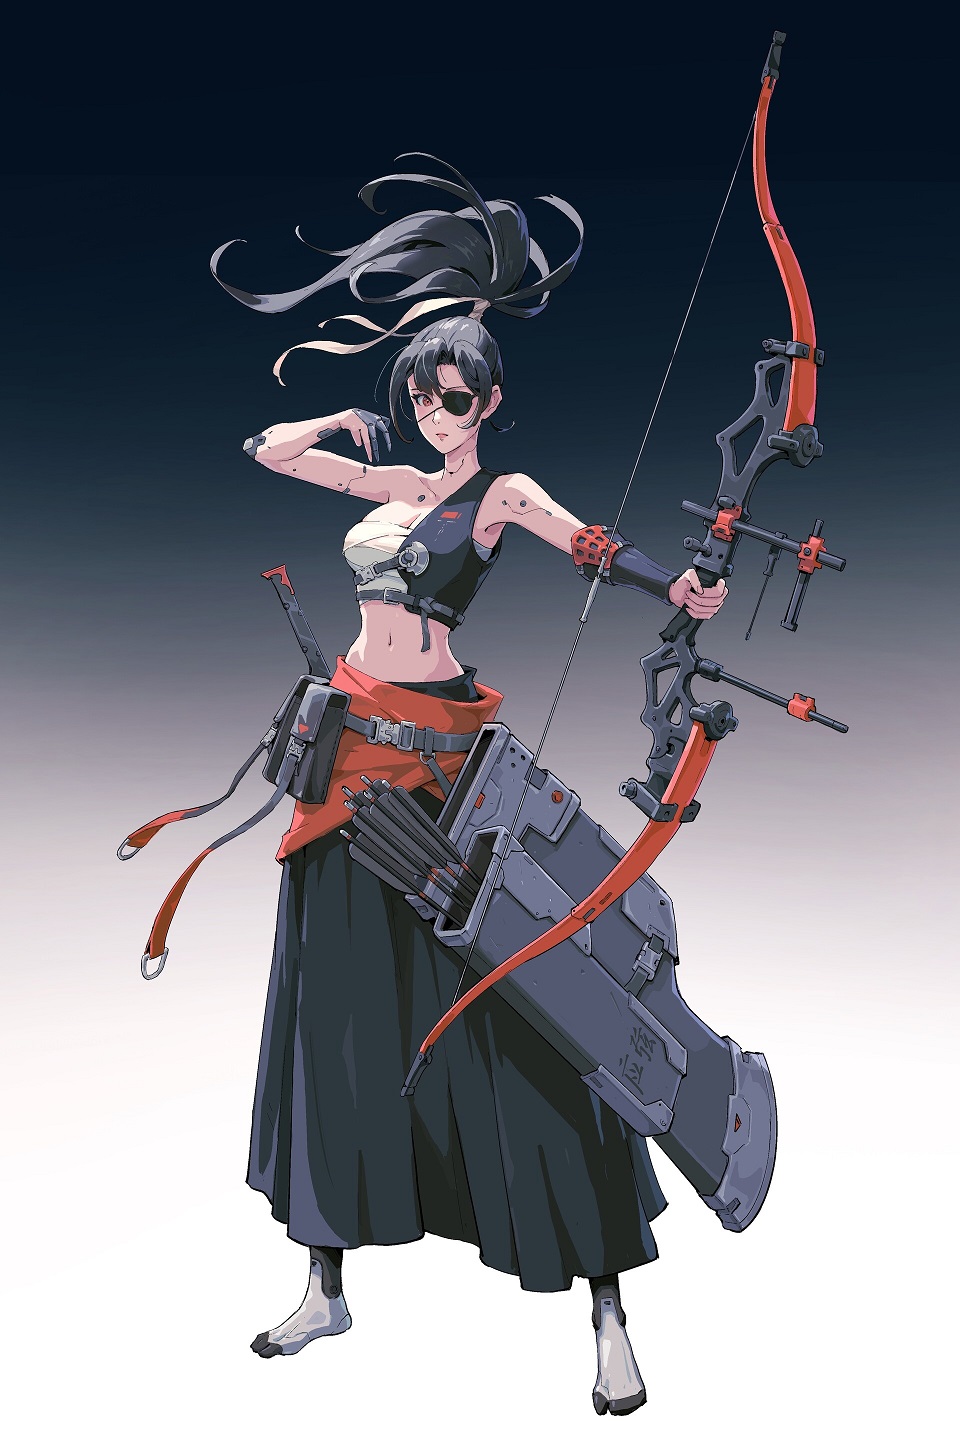 Anime 960x1440 Wenfei Ye drawing women dark hair skirt arrows bow science fiction wind eyepatches archer portrait display anime girls bow and arrow belly